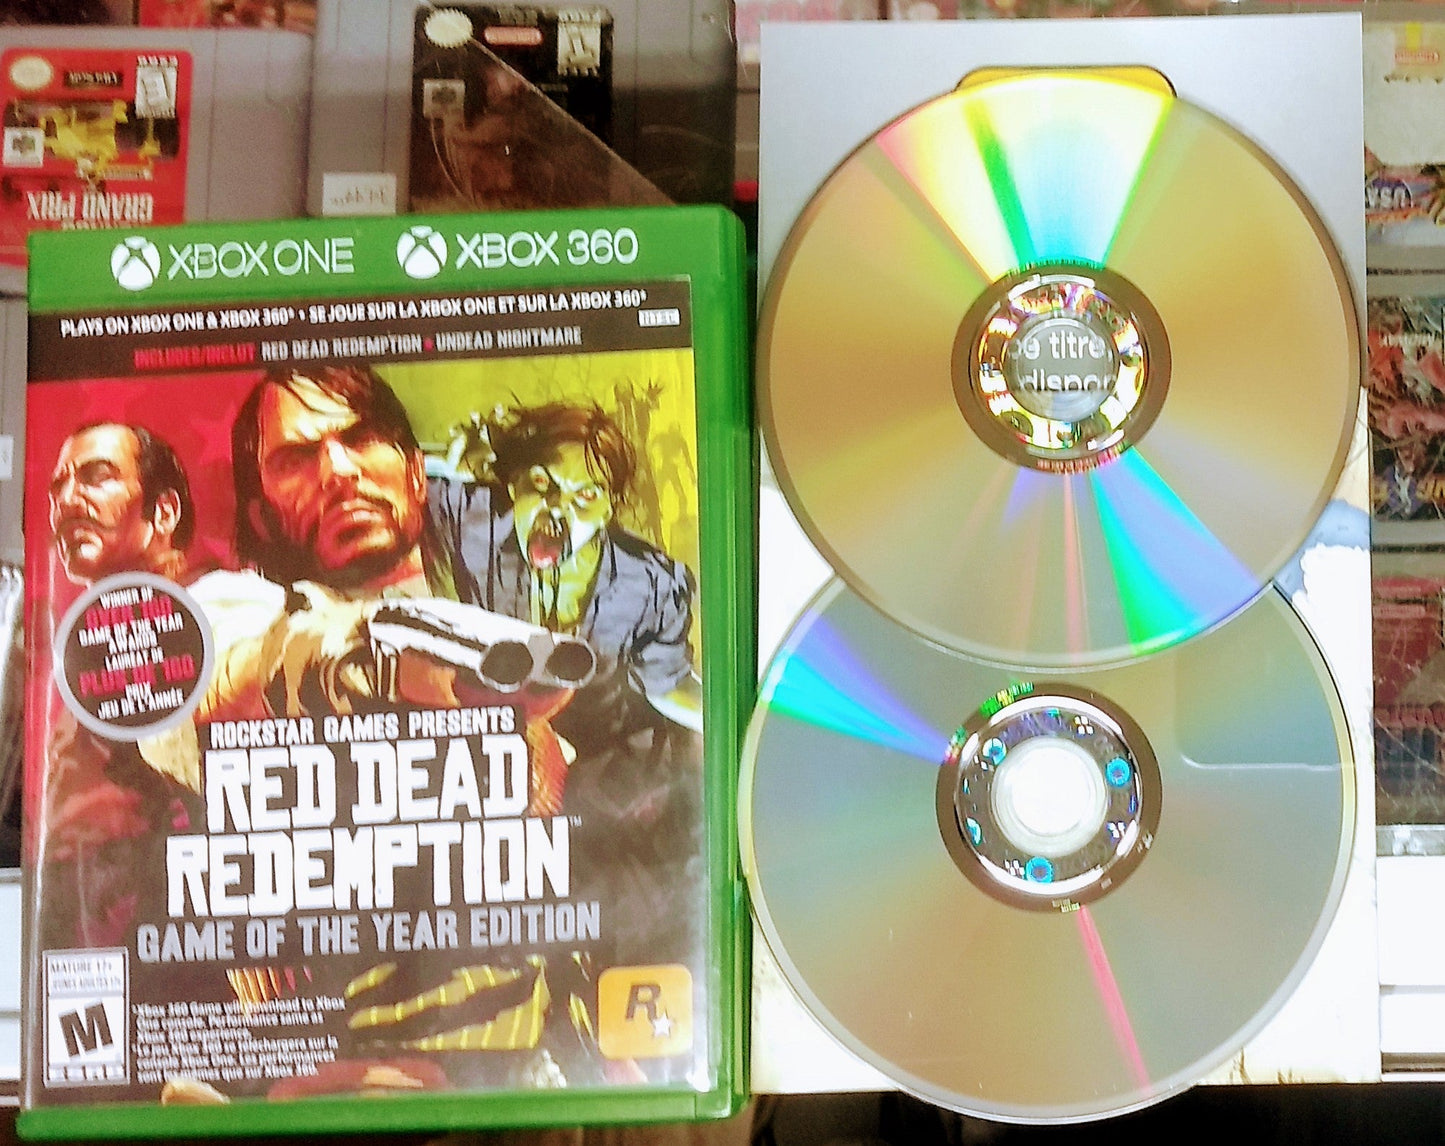 RED DEAD REDEMPTION - GAME OF THE YEAR EDITION GOTY (XBOX 360 X360 / XBOX ONE XONE) - jeux video game-x